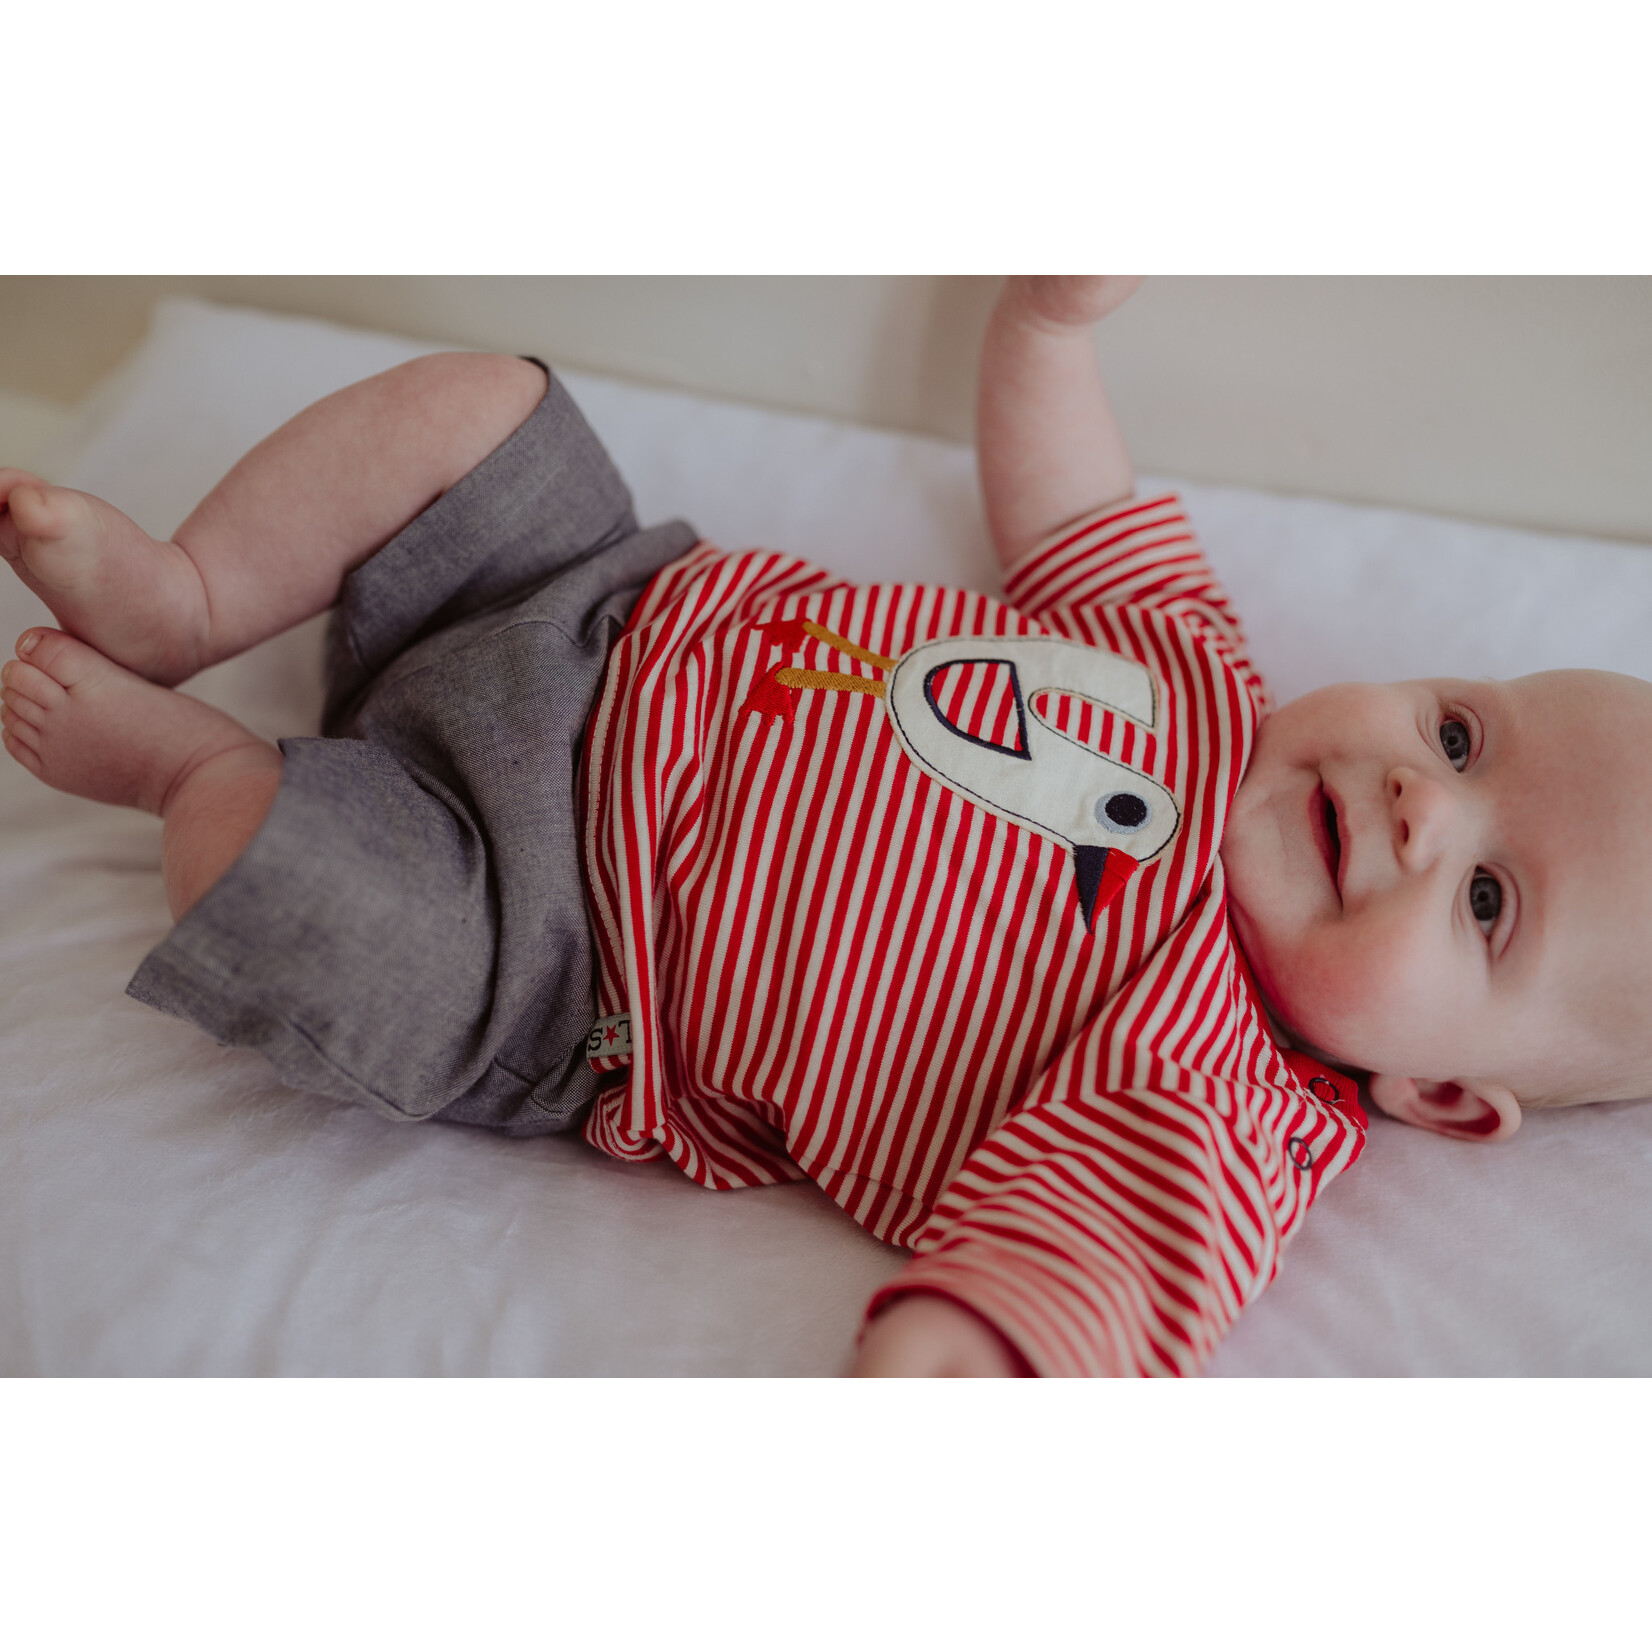 Lilly+Sid LILLY+SID - Two-piece Set - Red Striped T-shirt with Seagull Appliqué and Matching Shorts